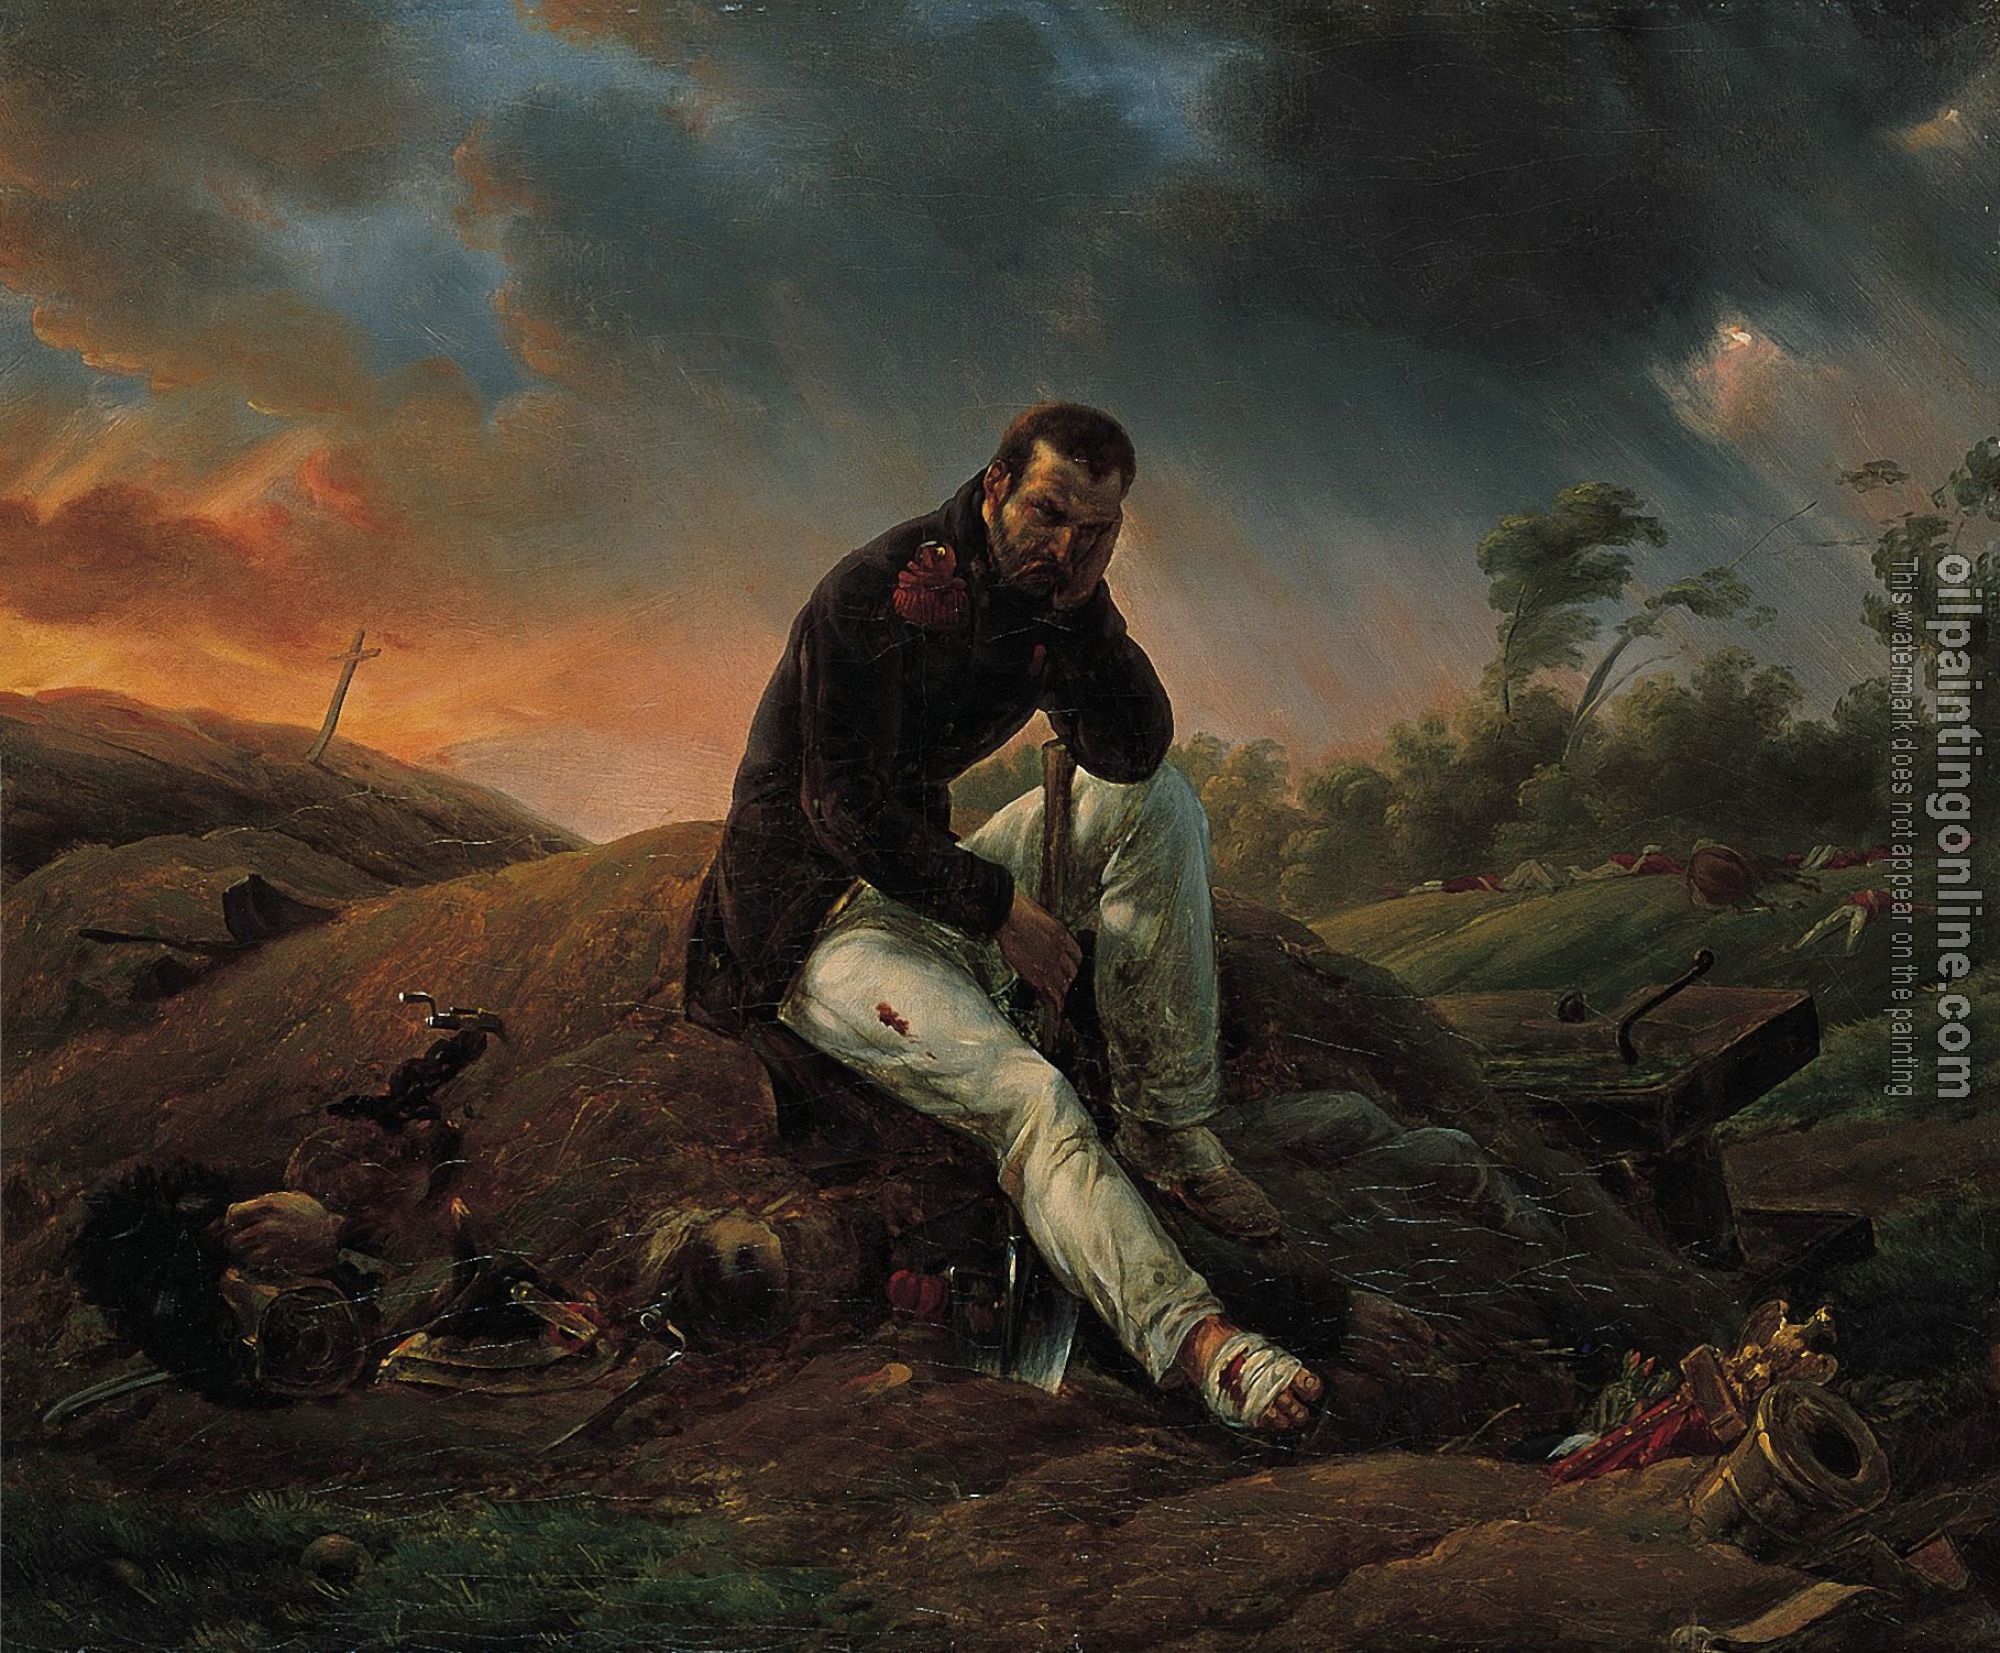 Vernet, Horace - Horace Vernet, The Soldier on the Field of Battle